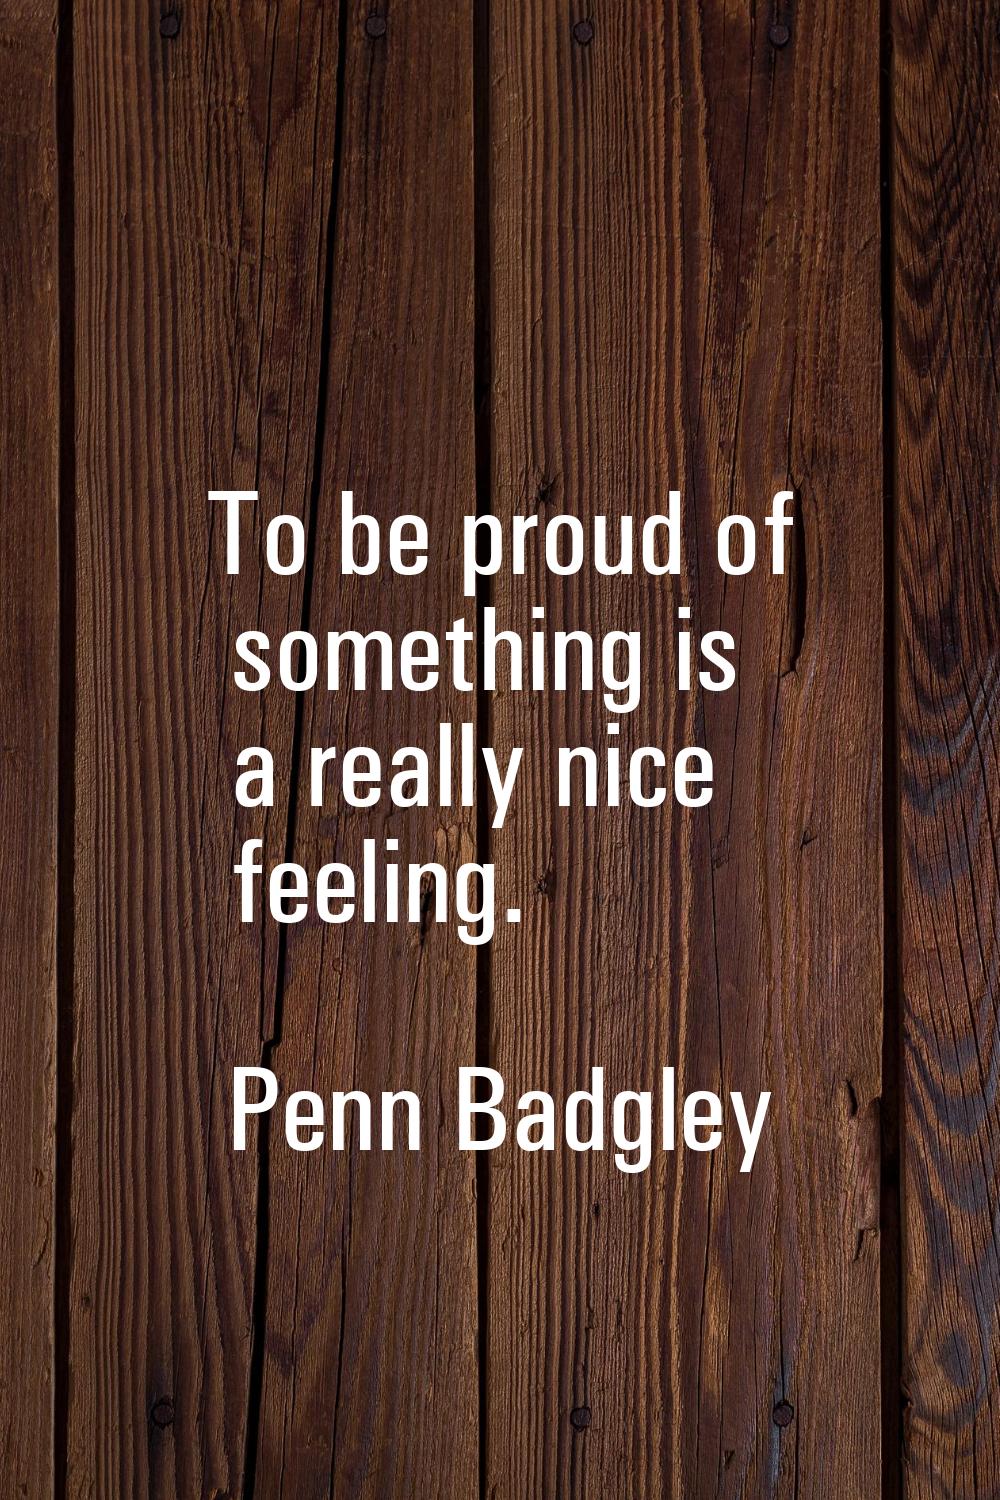 To be proud of something is a really nice feeling.